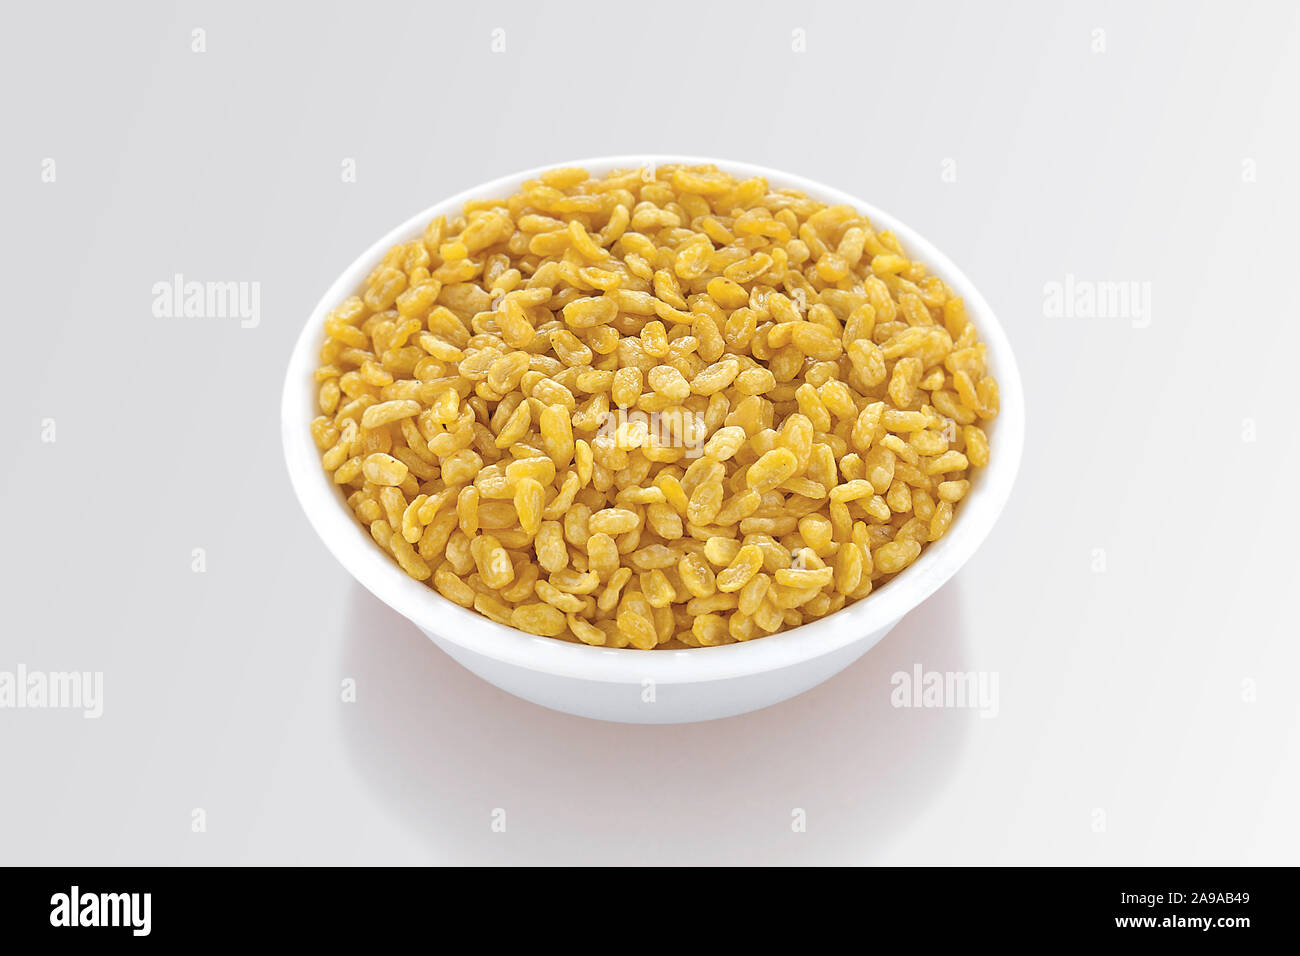 raditional Indian deep-fried moong dal namkeen - The mung bean, alternatively known as the green gram, maash, or moong, selective focus - Image Stock Photo